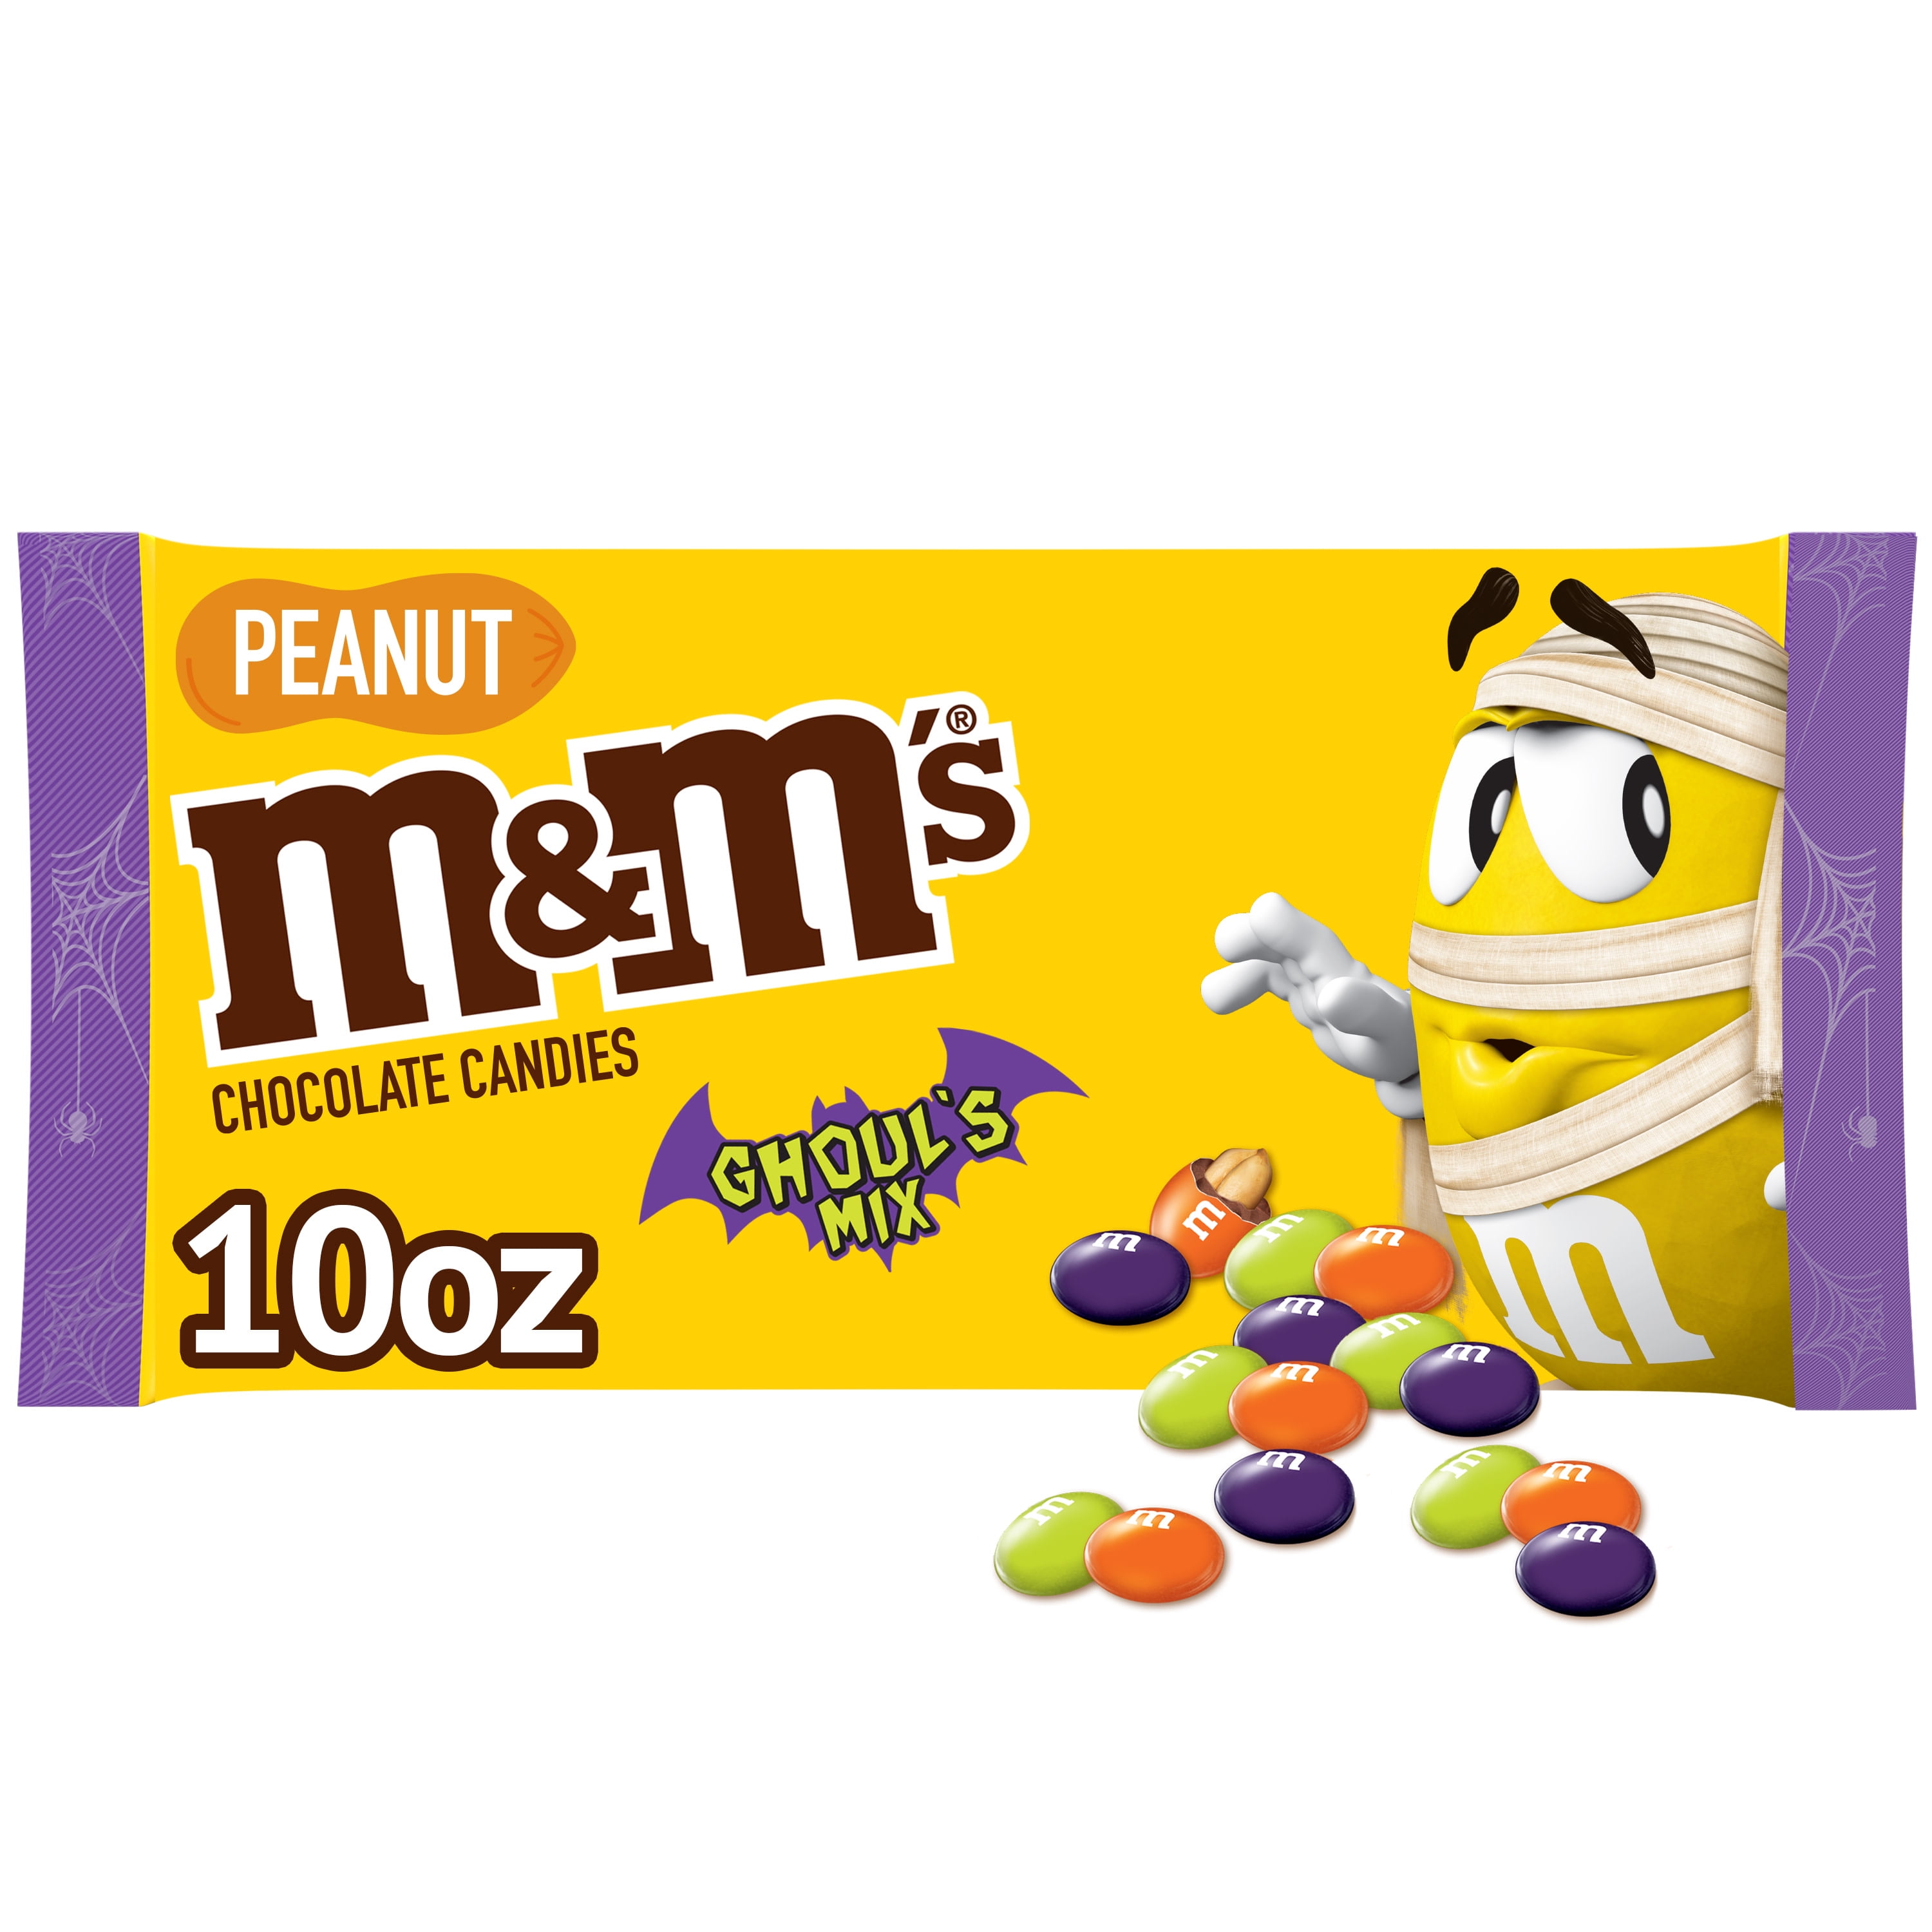  M&M Minis Milk Halloween Chocolate Candy Spooky Edition -  Sweet Milk Peanut Chocolate Halloween Mini M&Ms Bulk Tubes Encased in  Vibrant Candy Shell Colors - Melt in Your Mouth Snacks